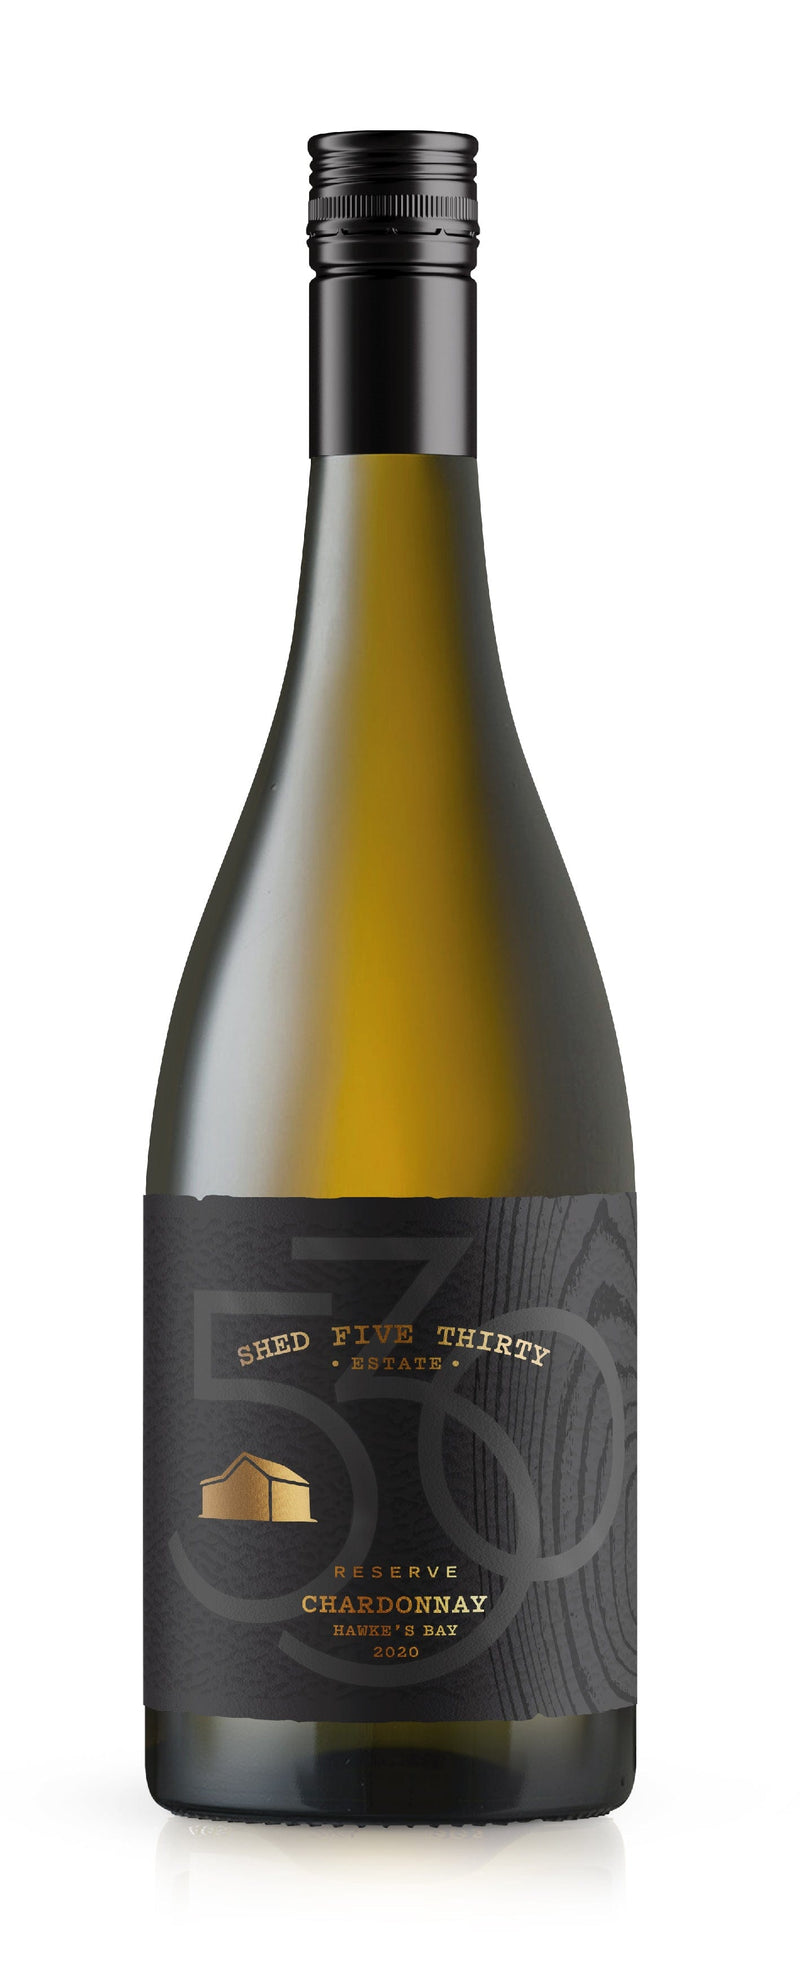 Shed Five Thirty Reserve Chardonnay 2021 75cl